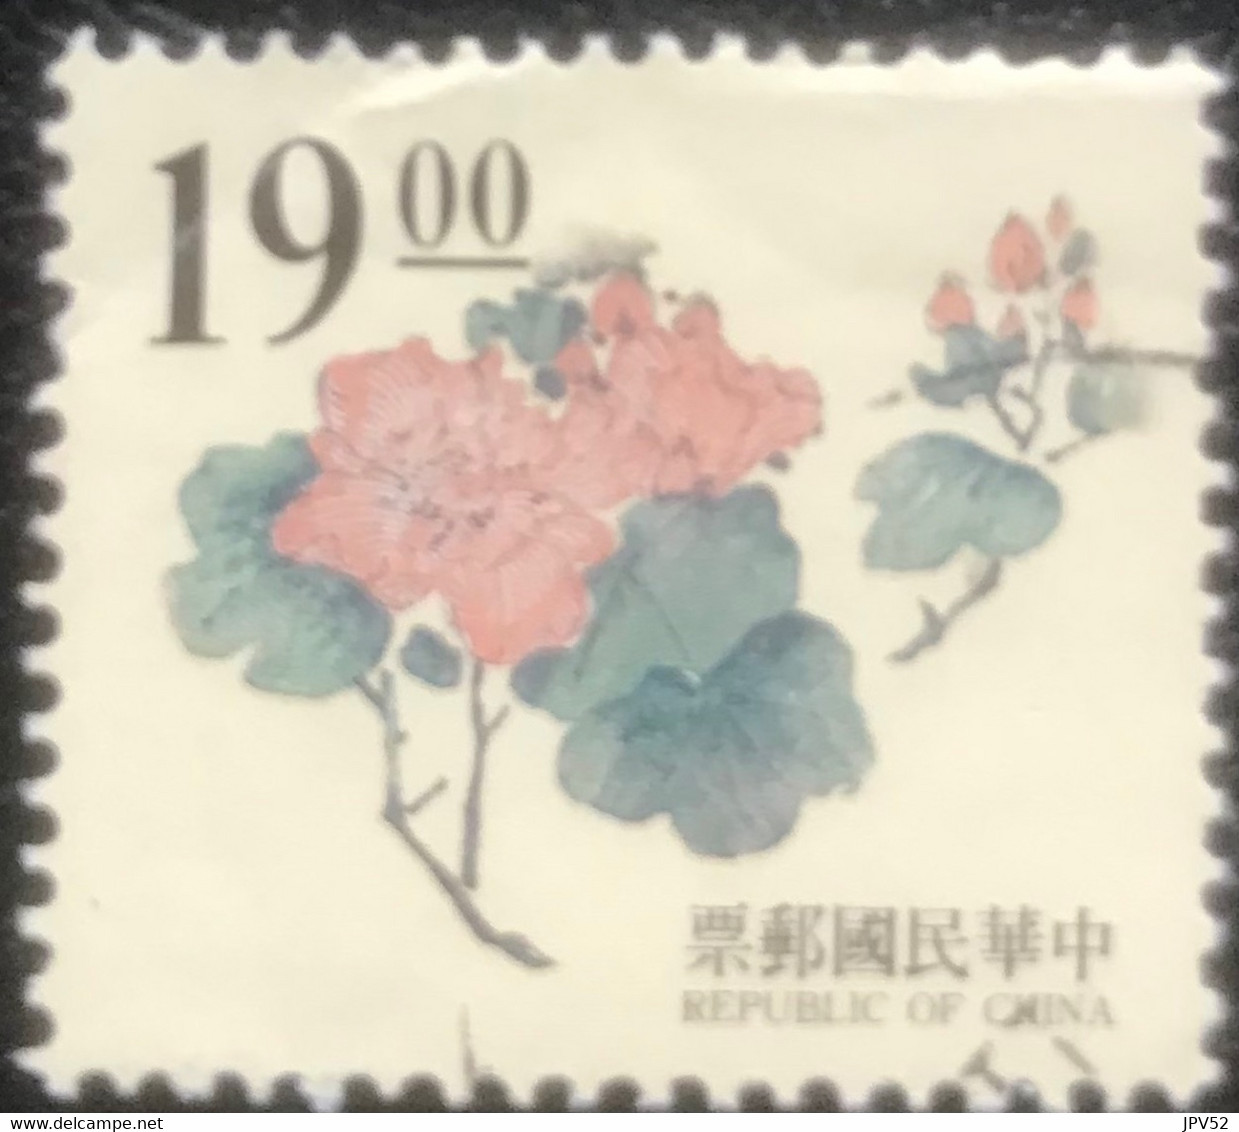 Republic Of China - Taiwan - C6/11 - (°)used - 1995 - Michel 2219 - Oude Chinese Gravures - Oblitérés